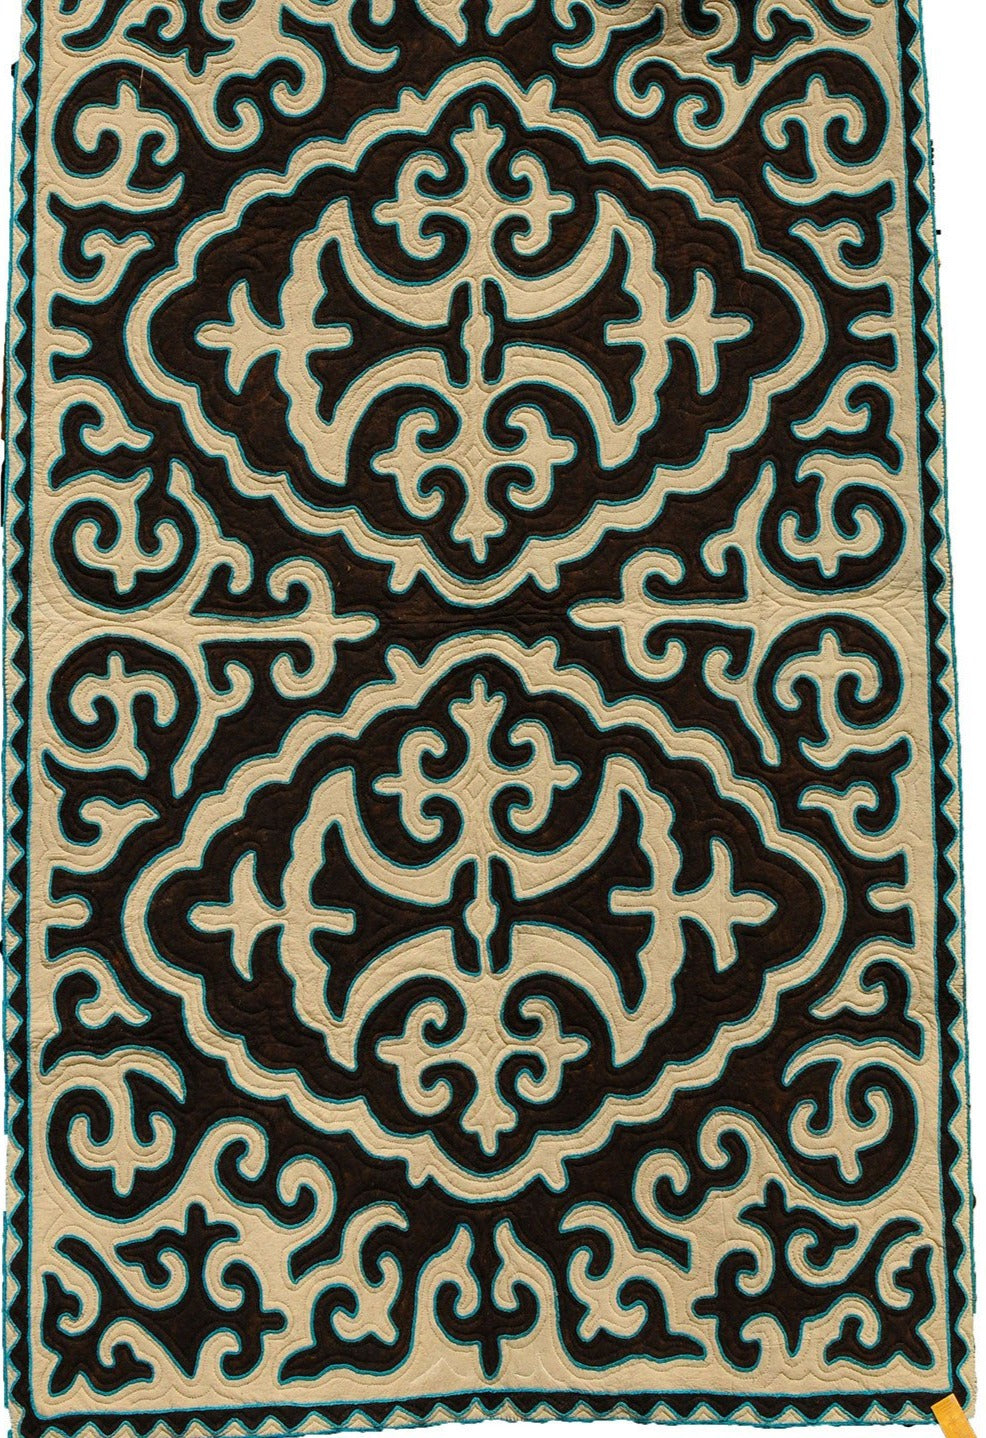 Brown and Tan Felt Rug with Blue Trim